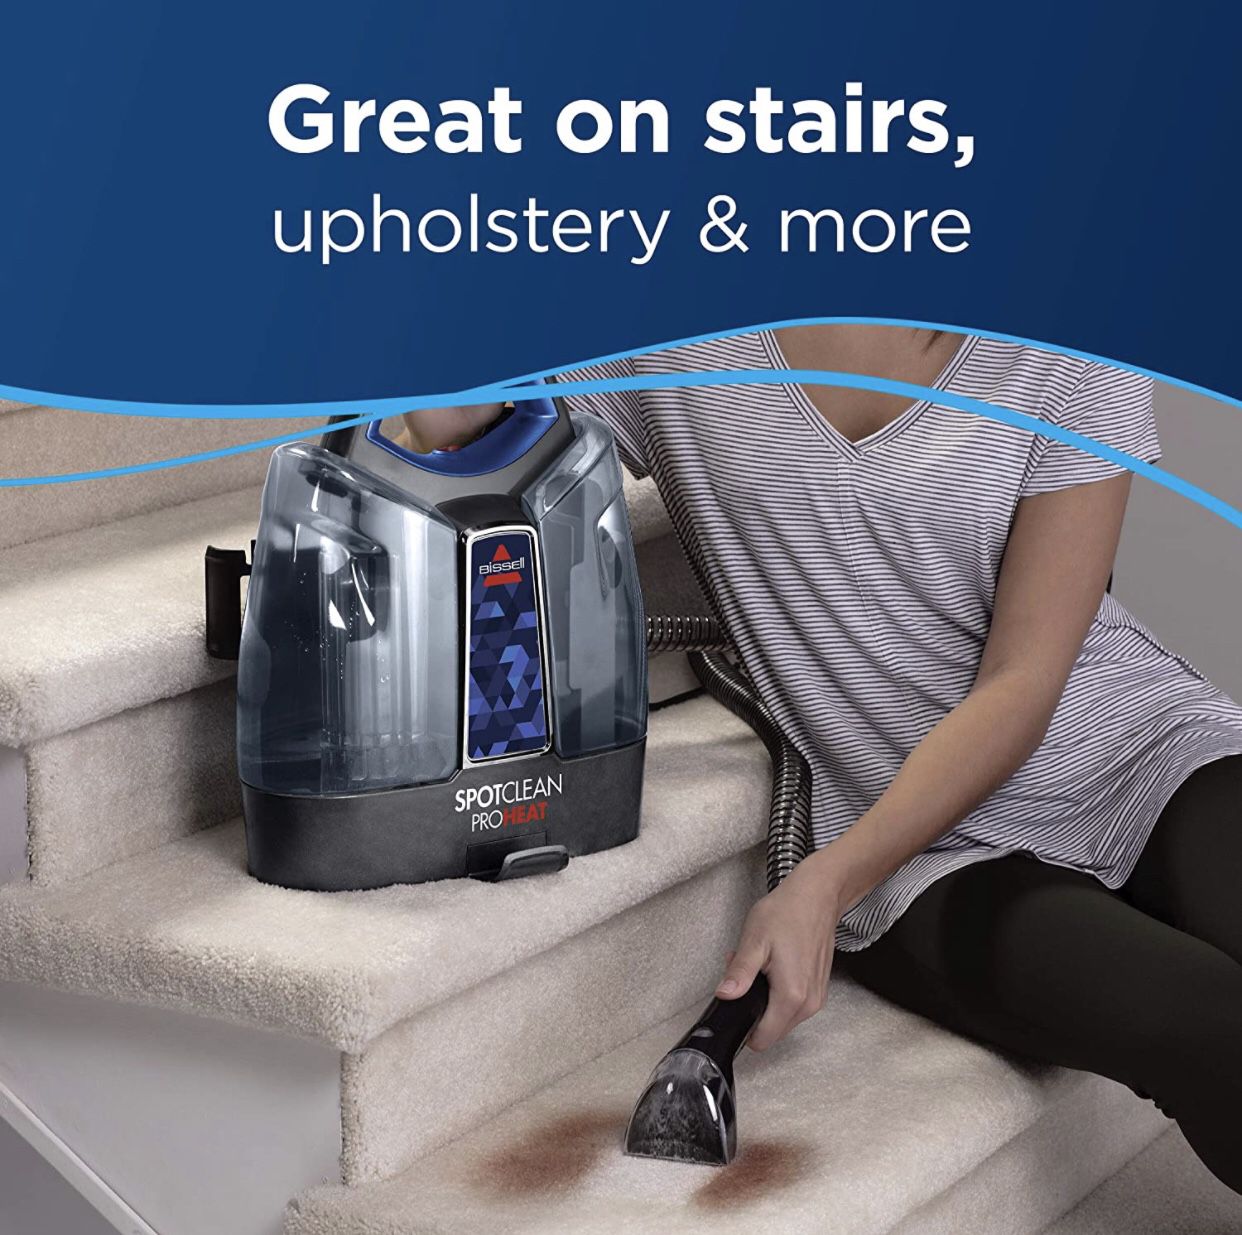 NEW! Bissell SpotClean ProHeat Portable Spot and Stain Carpet Cleaner, 2694, Blue